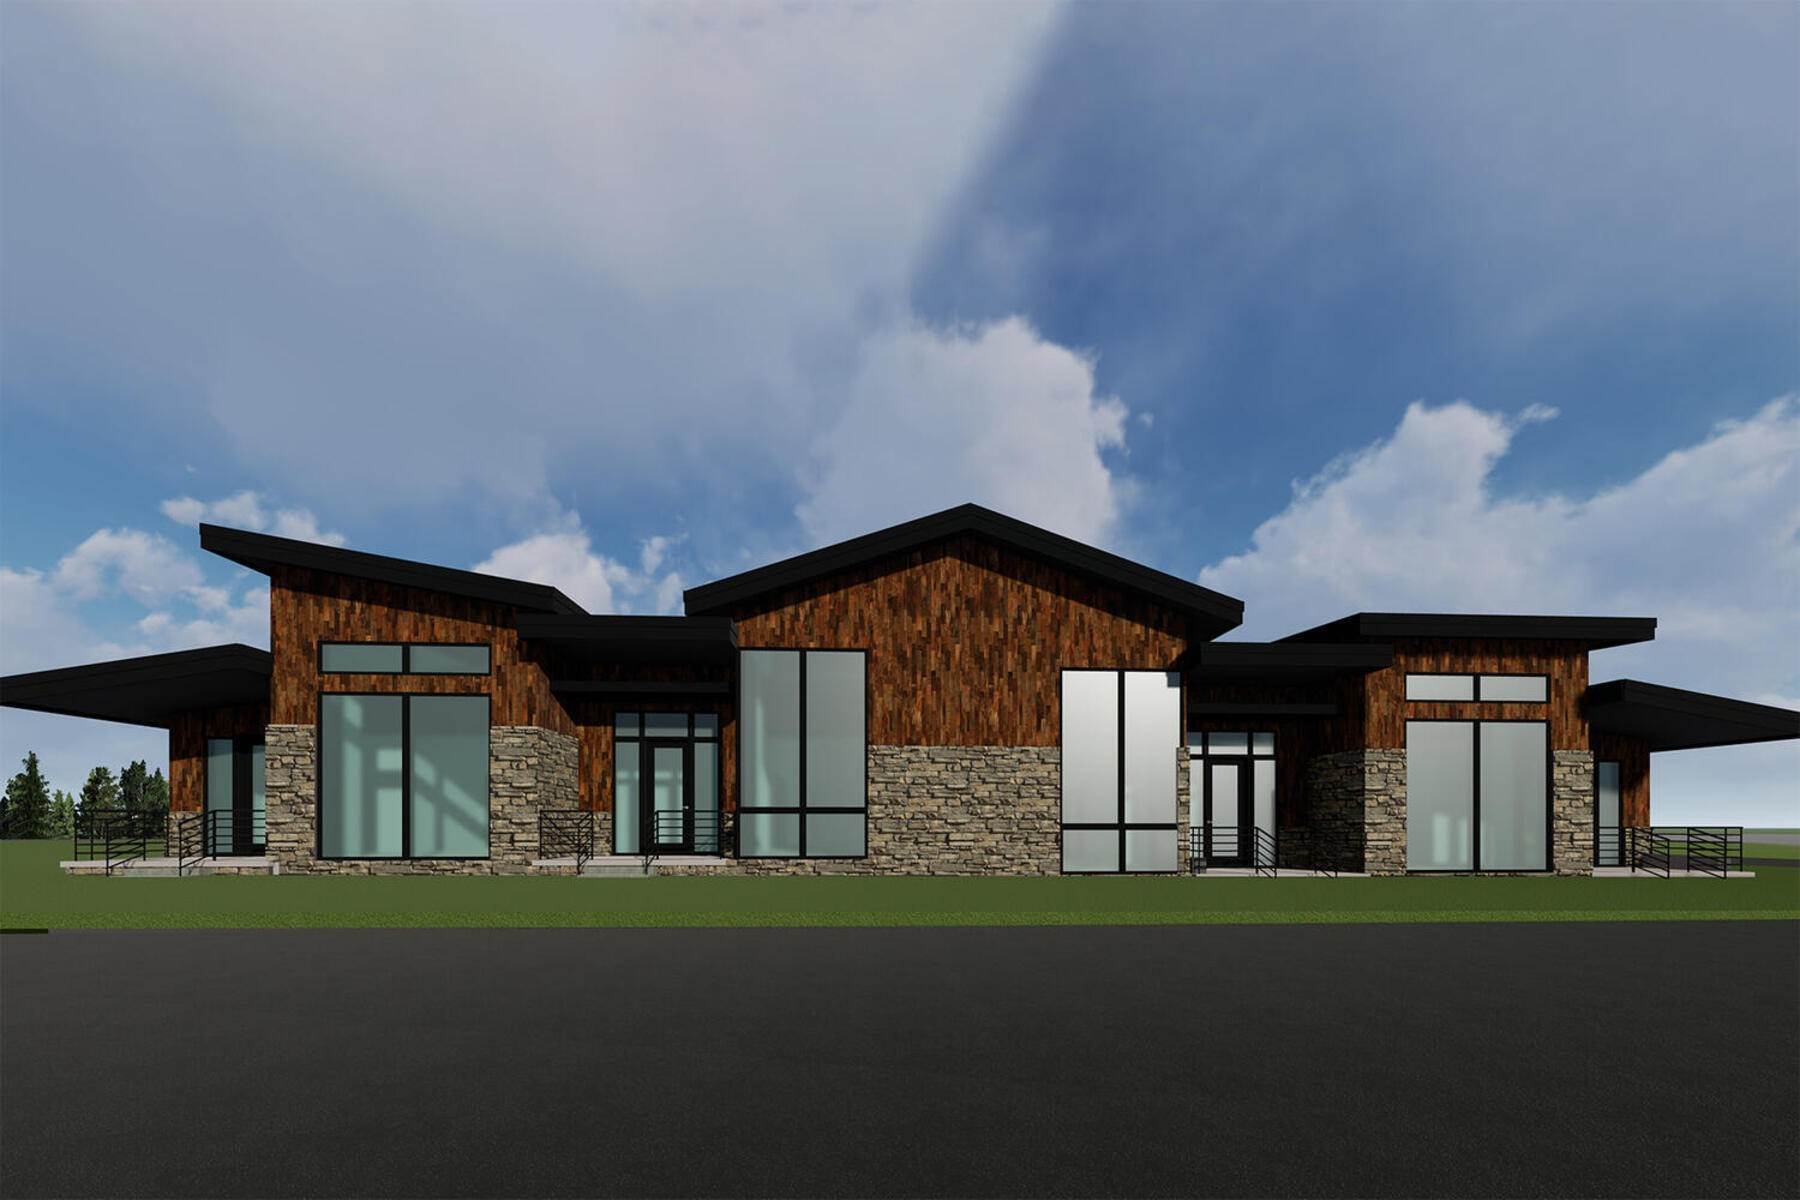 Property for Sale at Coming This Summer! Wasatch Springs Commercial/Mixed-Use Development 1064 W Wasatch Spring Rd #U-4 Kamas, Utah 84036 United States